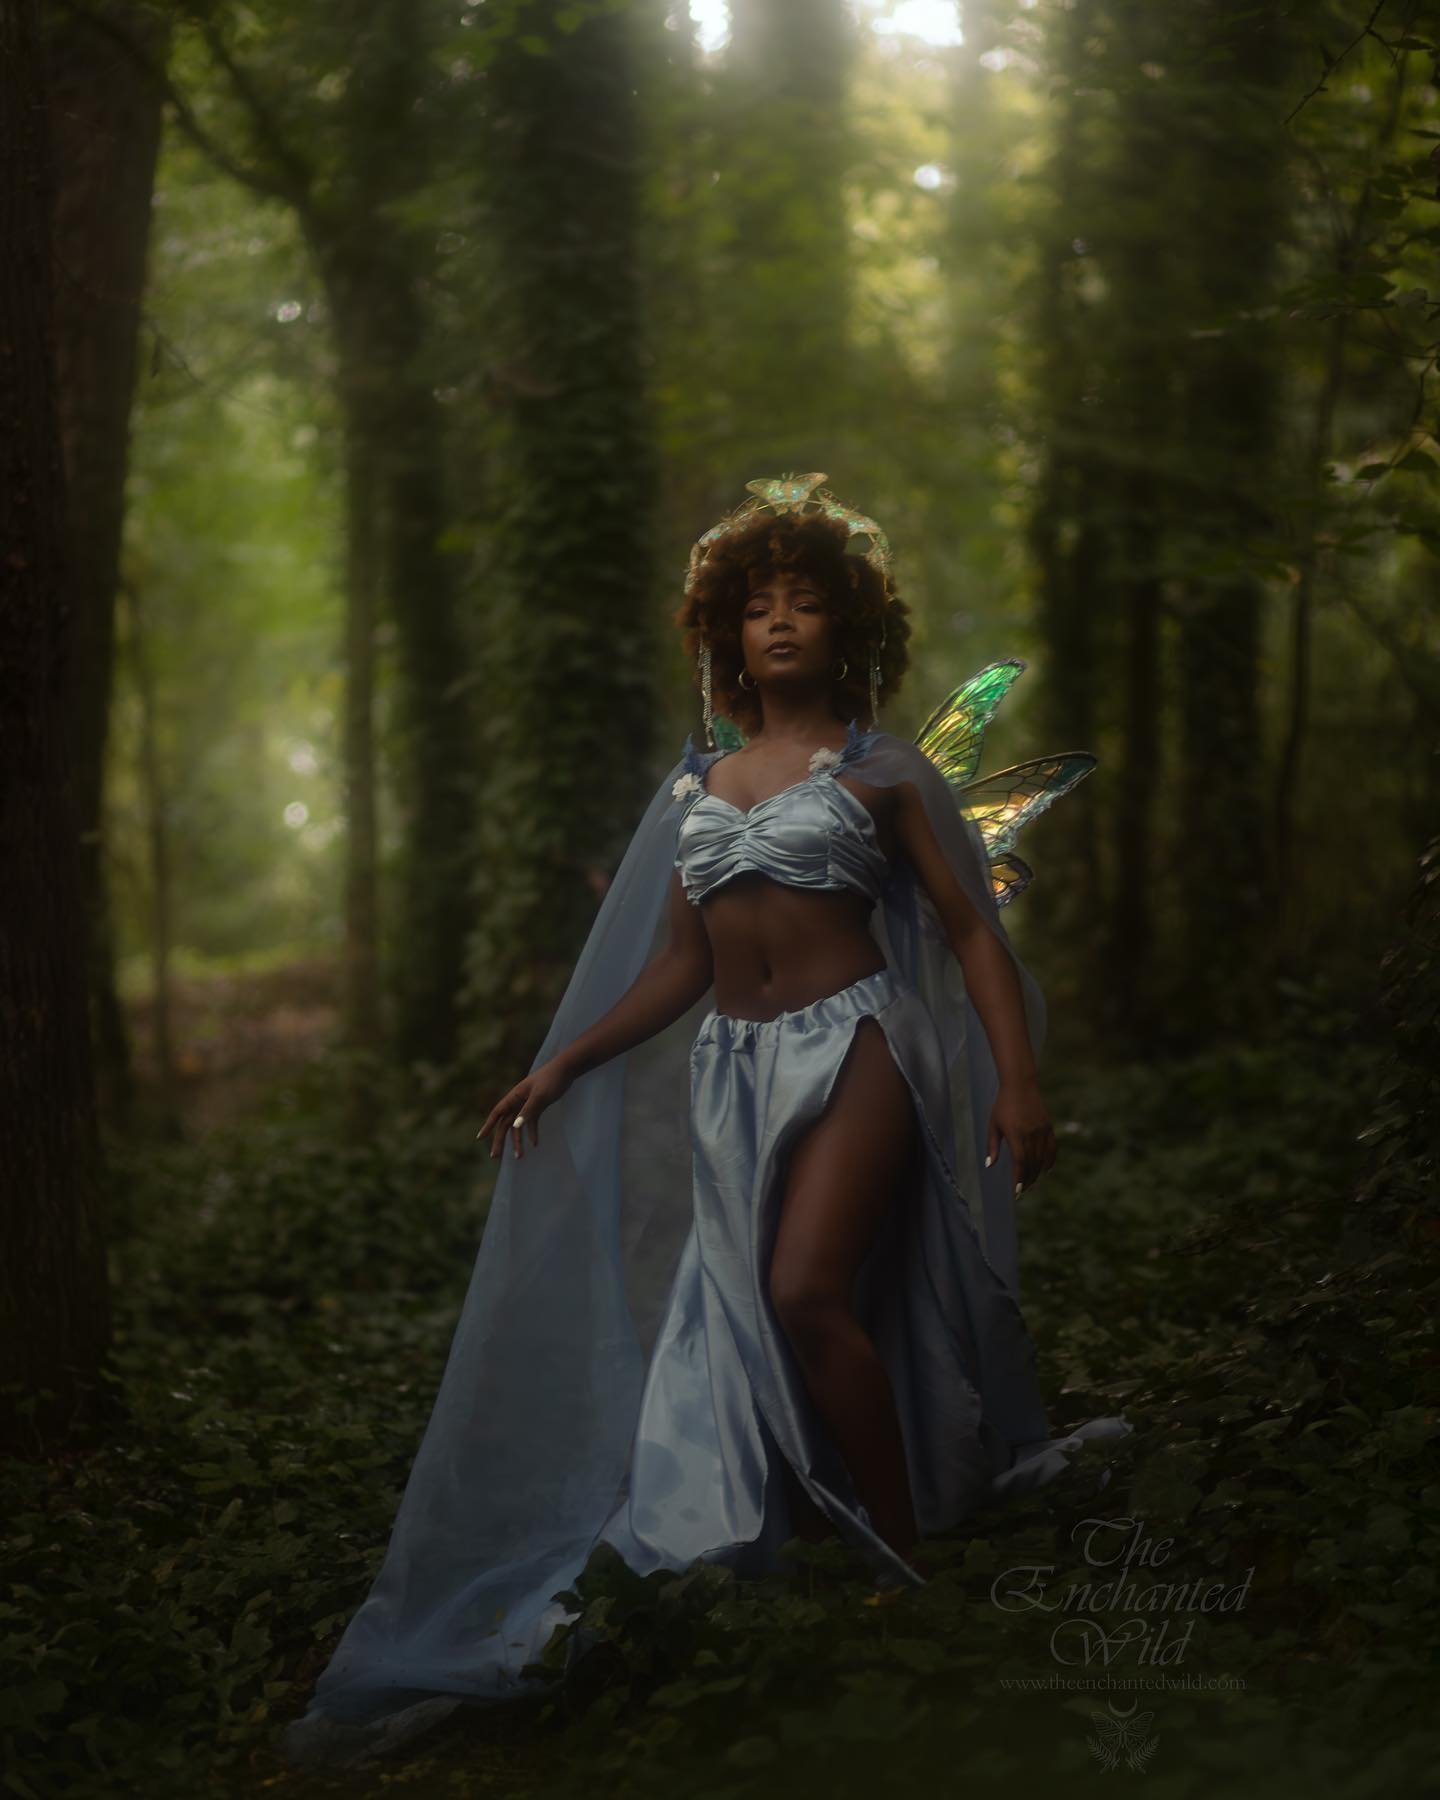 Reunited with @madame_zay to make some faerie magic. Loved getting to deck her out in my newest wings and dance around the forest together. 

Modelling by Zaynah
Photography, wings, crown, and wardrobe by @silverwinteroak / @theenchantedwild